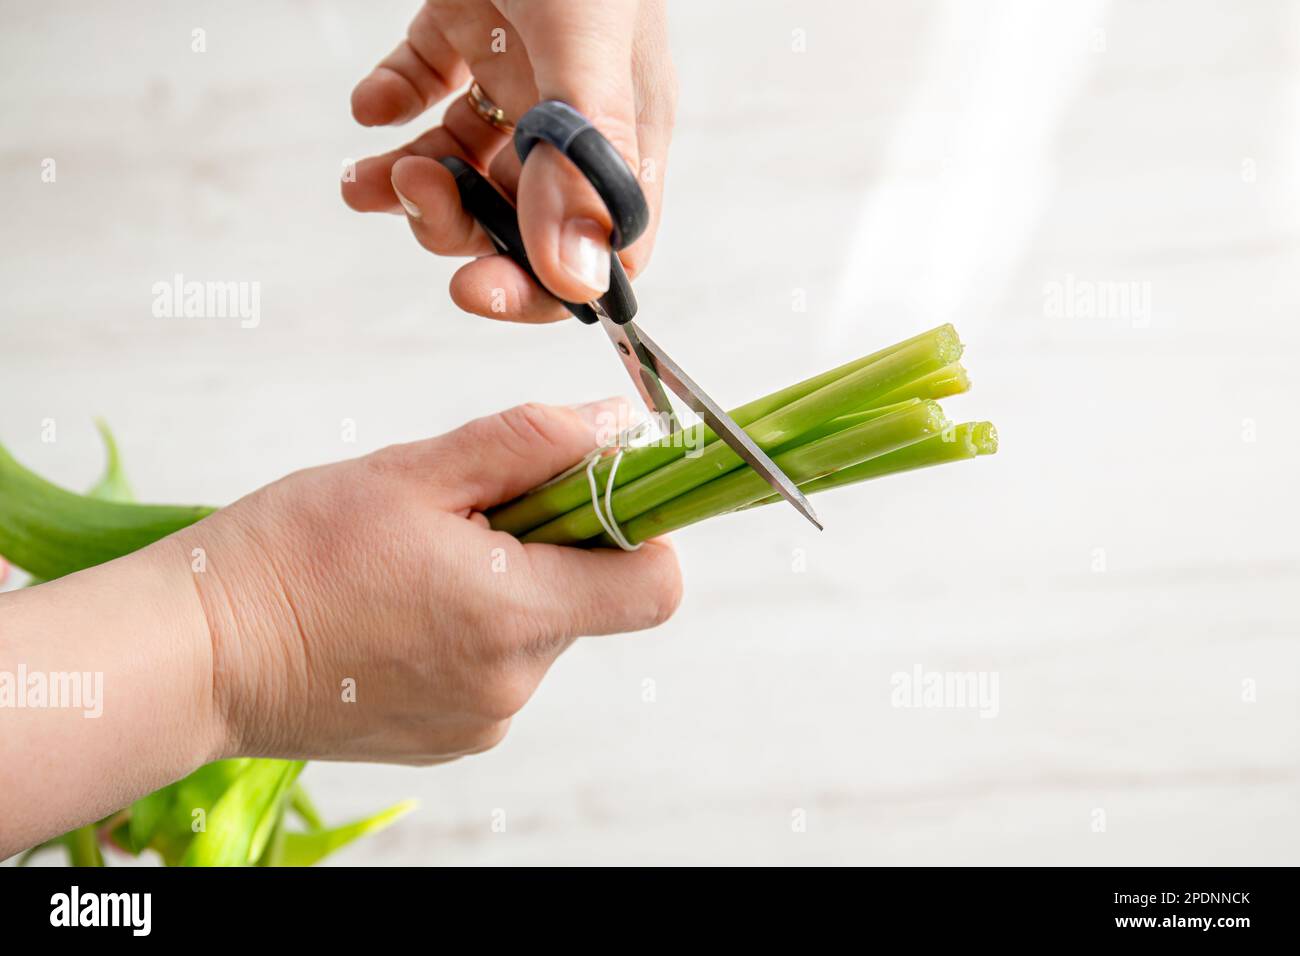 Woman cutting back tulips stems with scissors before putting in vase, so flowers will not wilt and last longer in home room. Stock Photo